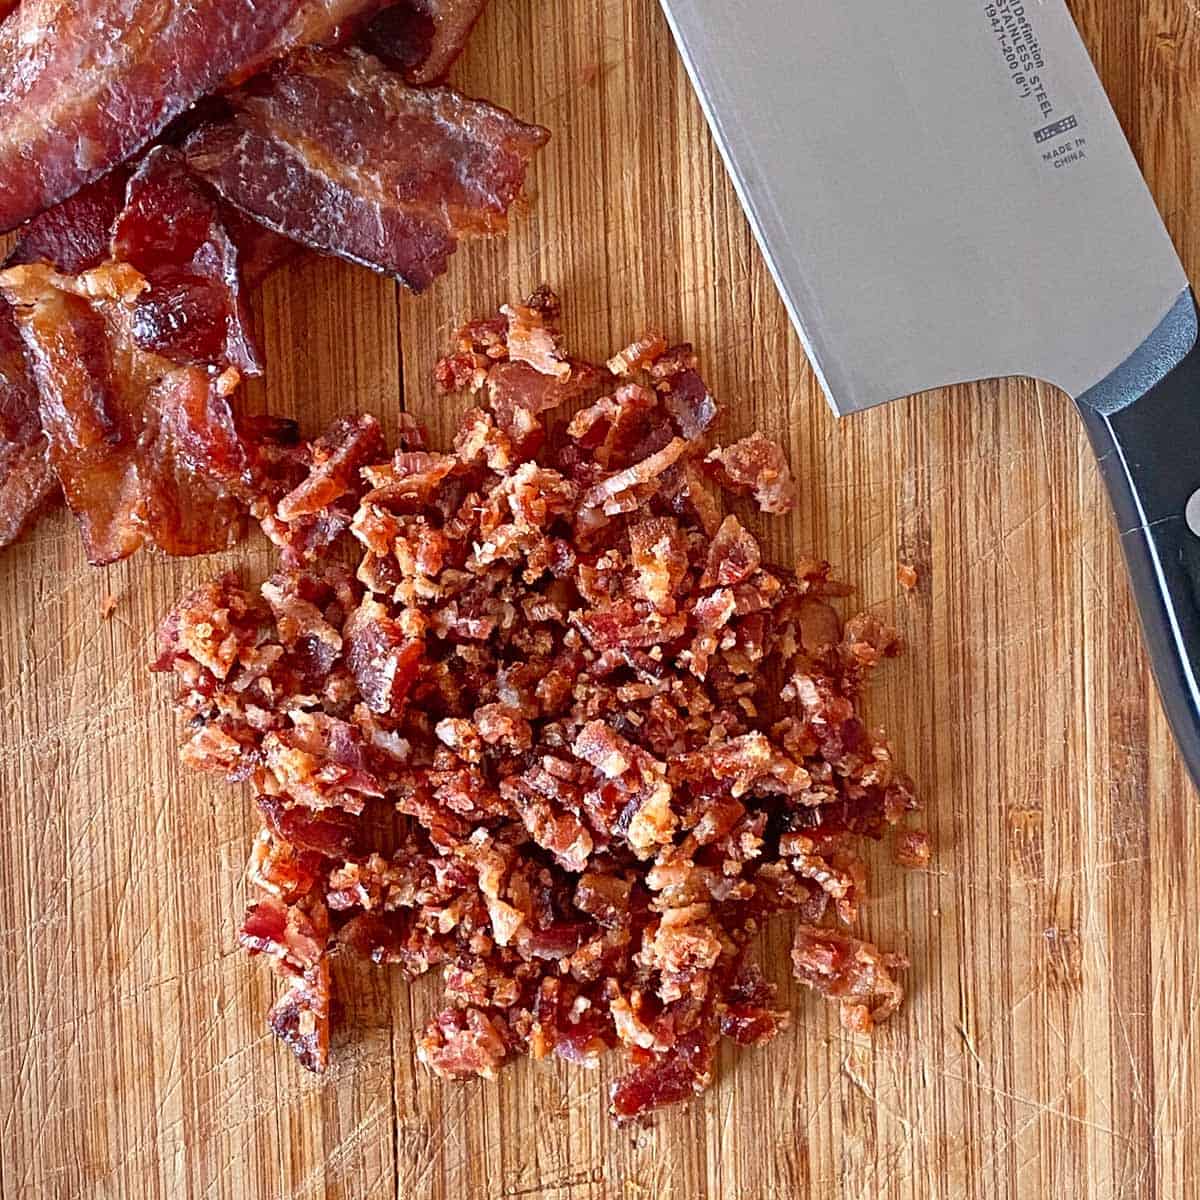 Chopped candied maple bacon and a knife on a cutting board.